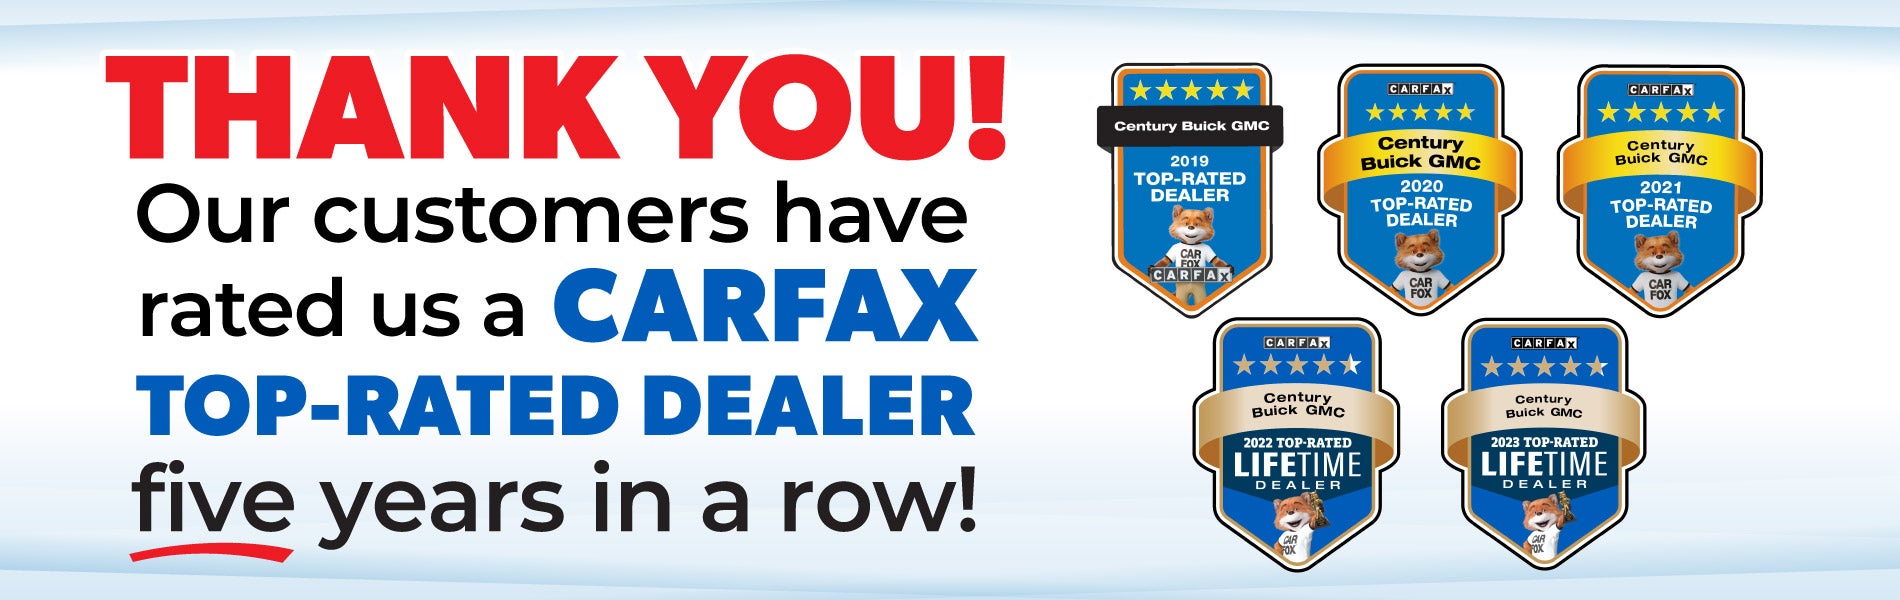 Thank you for rating us as a Carfax Top-Rated Dealer